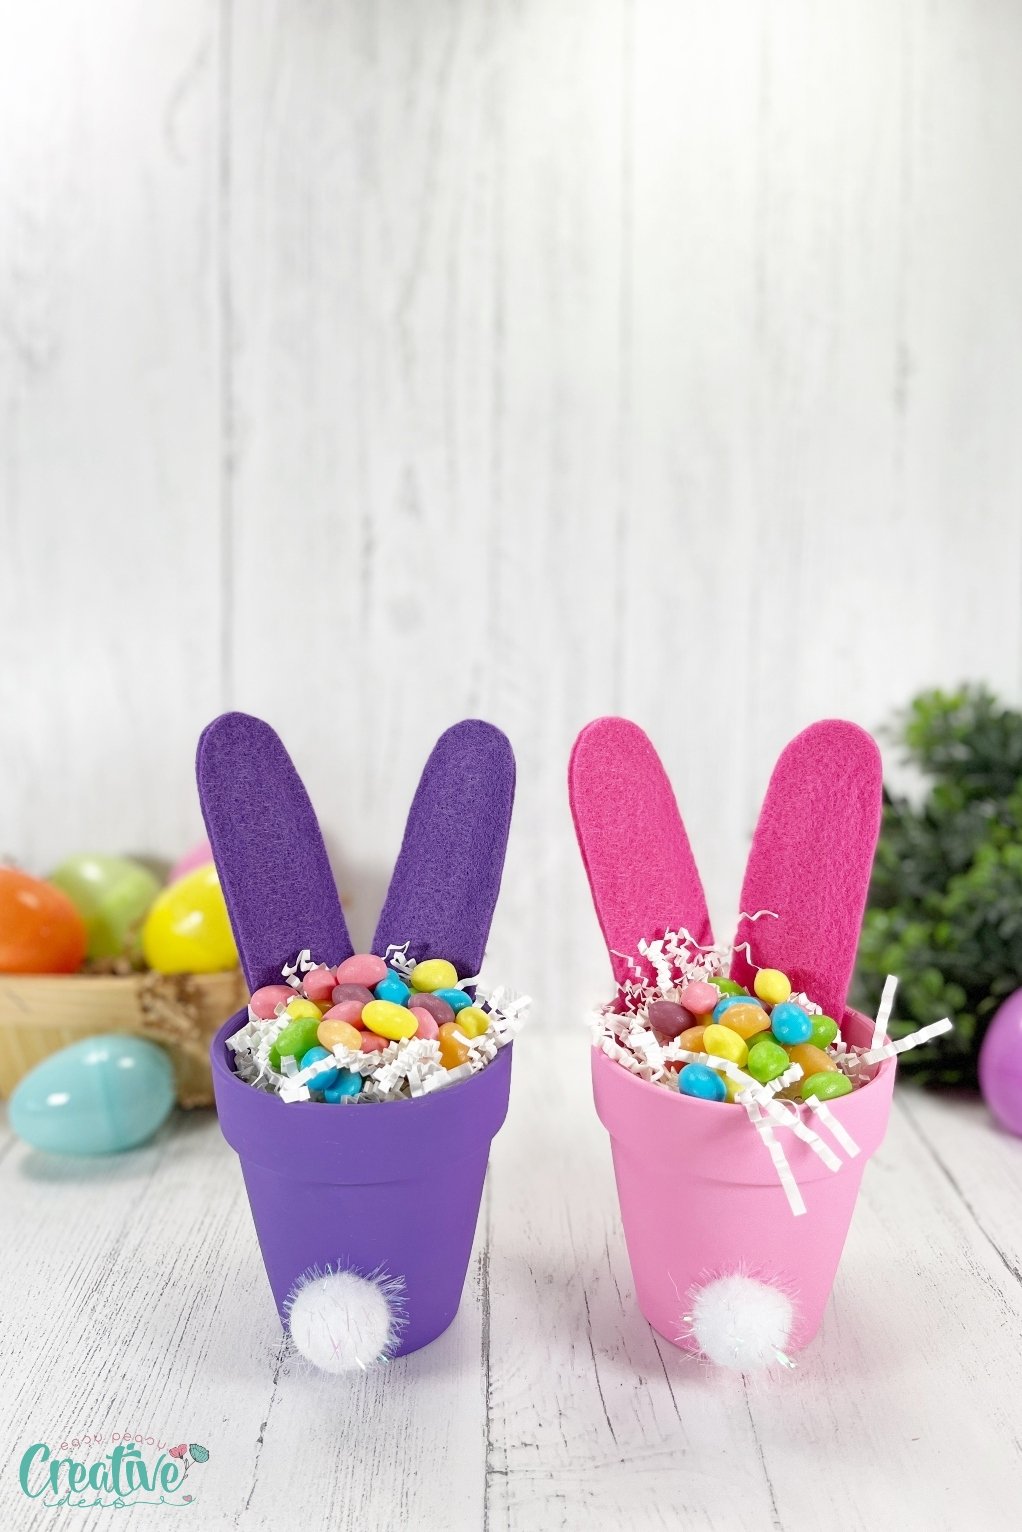 Crafting cuteness: Easter bunny butts, clay pot craft idea